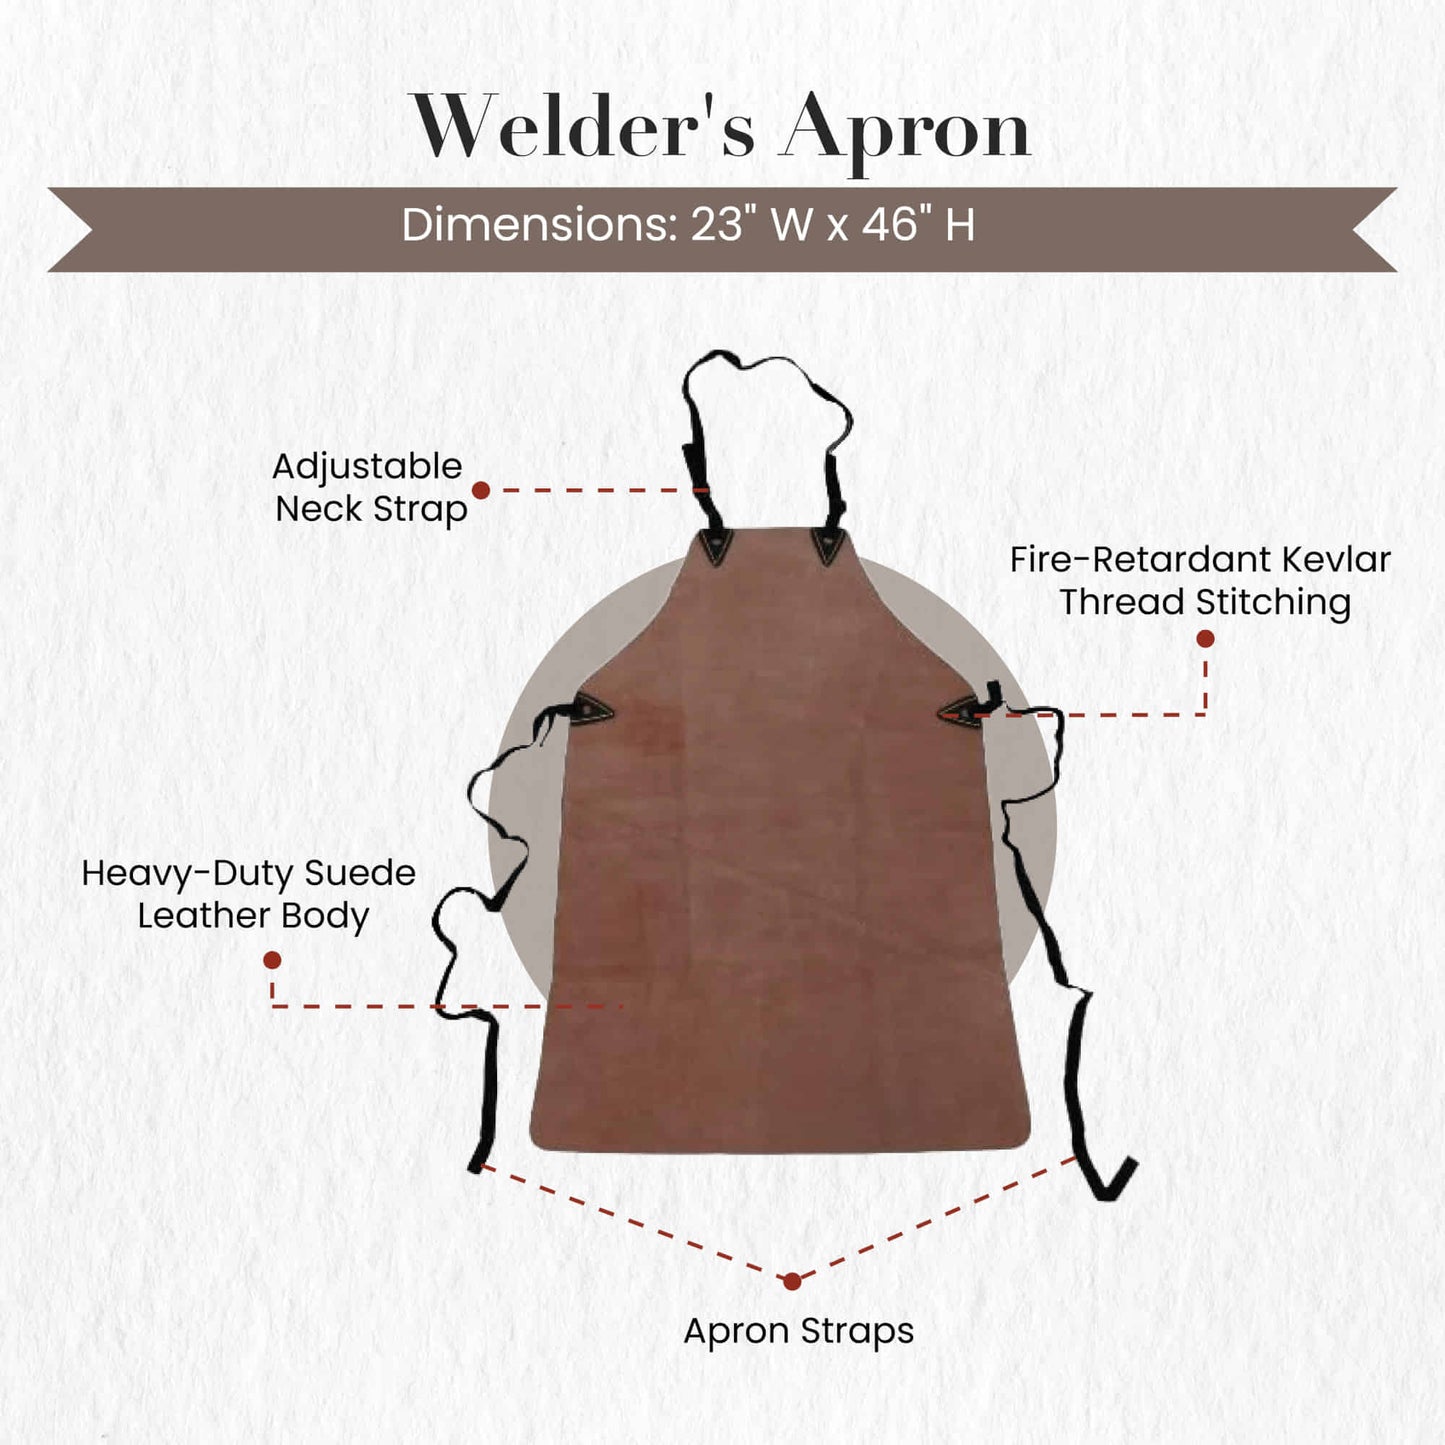 Style n Craft 81201 - Welder's Apron in Heavy Duty Suede Leather - Front View Showing the Details